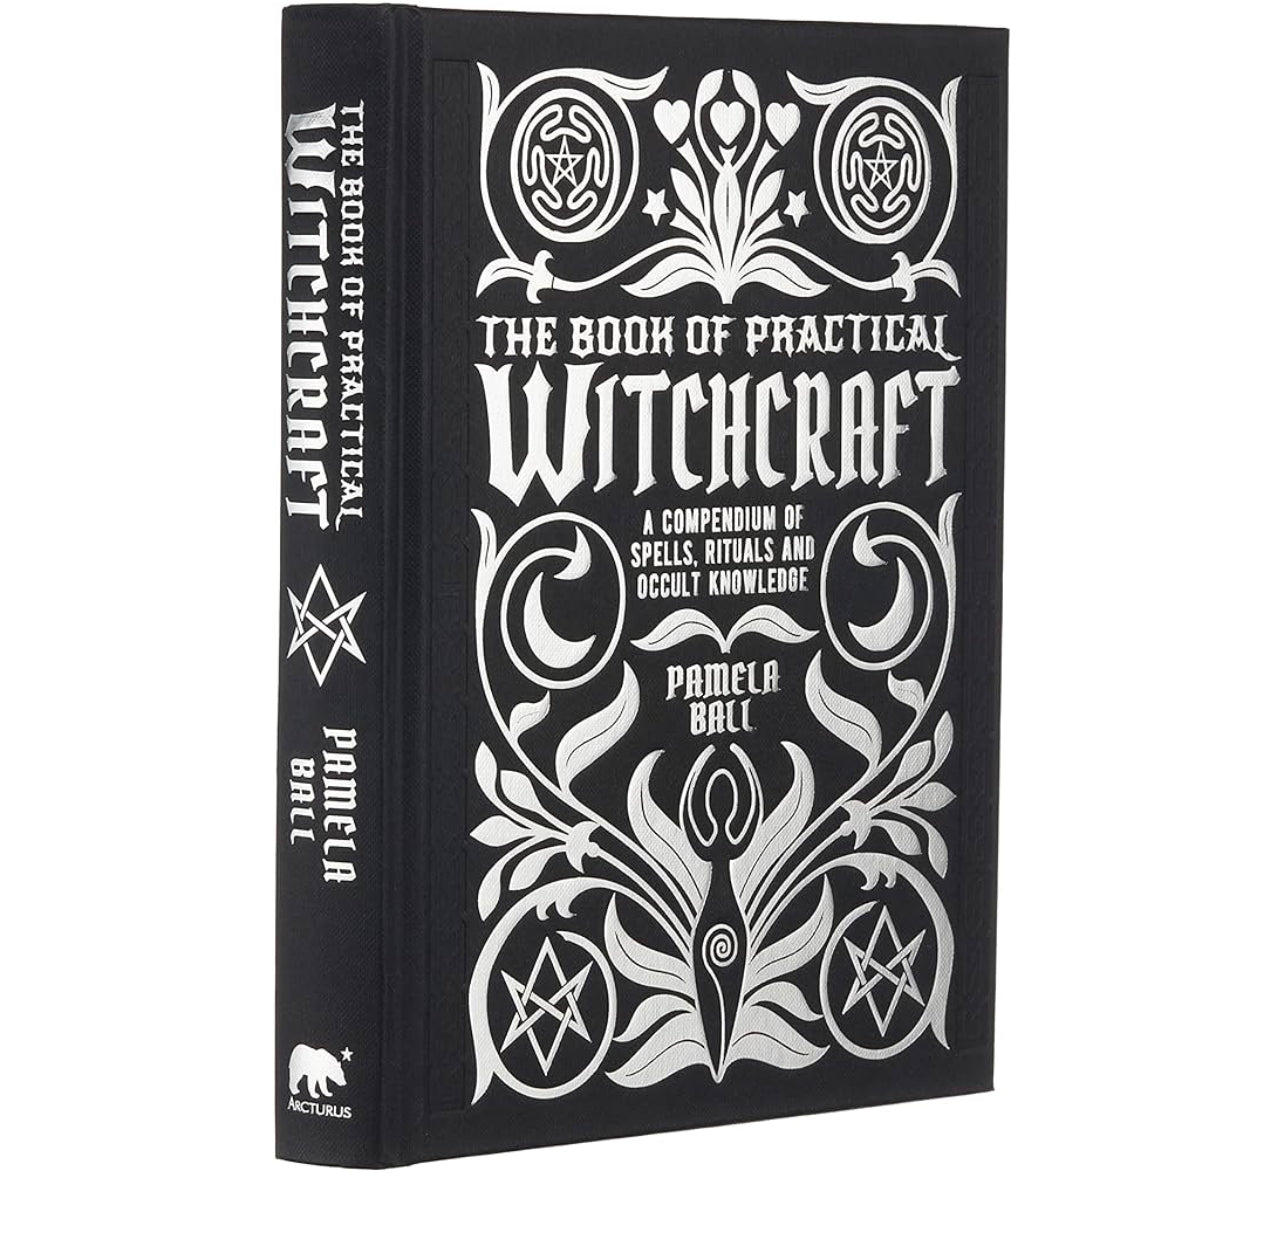 The Book of Practical Witchcraft: A Compendium of Spells, Rituals and Occult Knowledge I’m